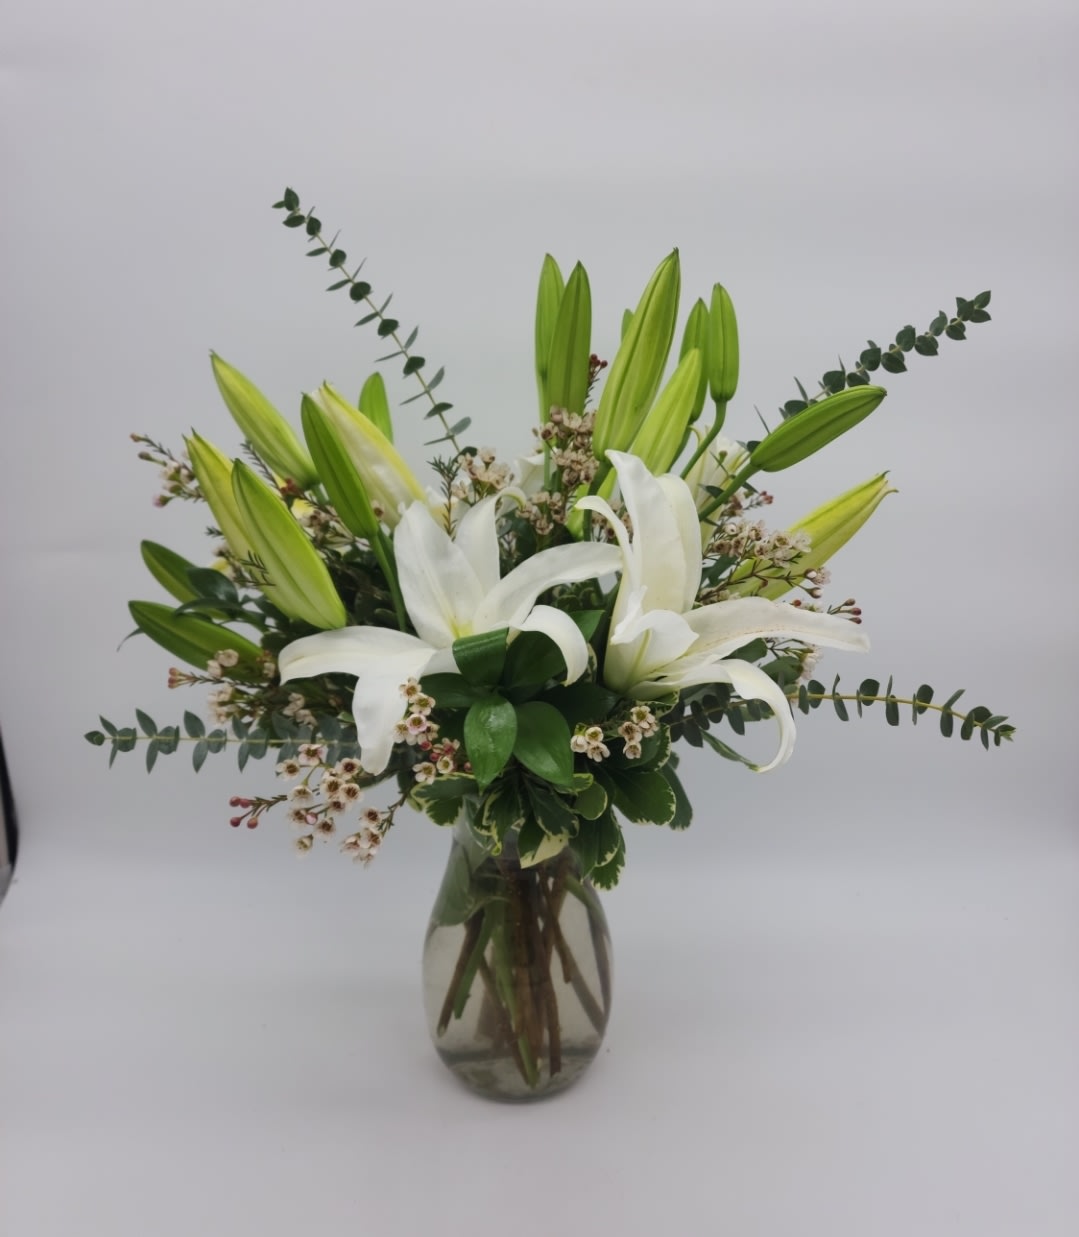 Written in the Stars - Elegant white lilies and pretty white waxflower stems are exquisitely arranged in a vase that's reminiscent of a star-filled sky. It really is a wish come true.  